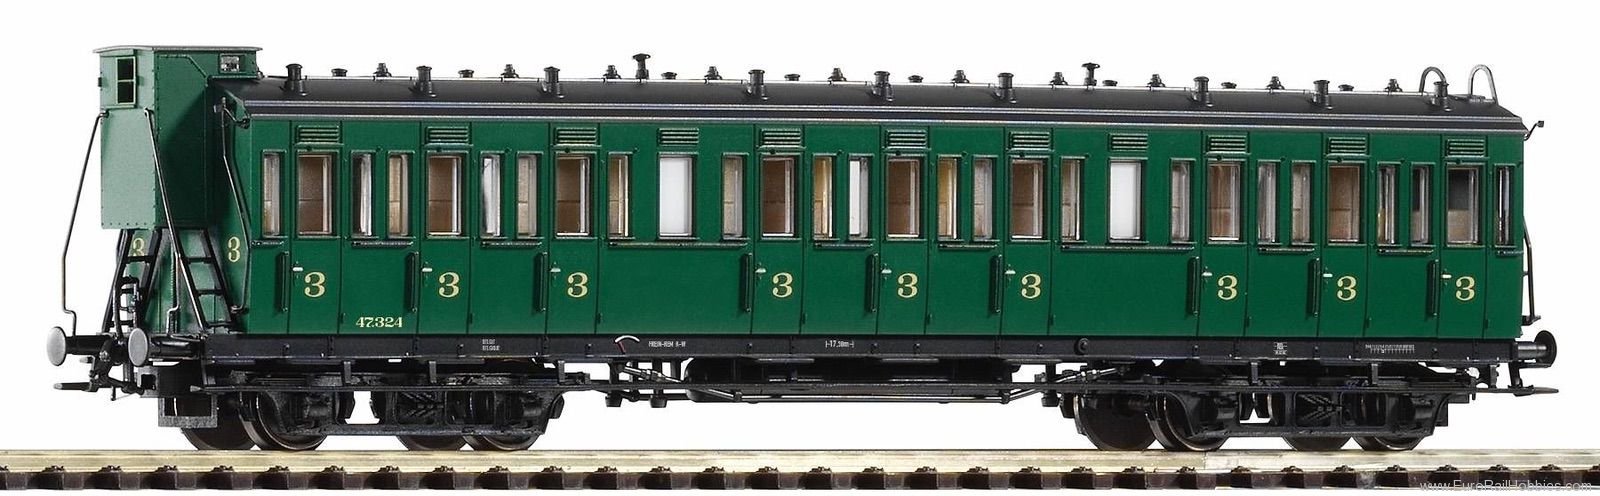 Piko 53335 3rd class SNCB III compartment car with a bra